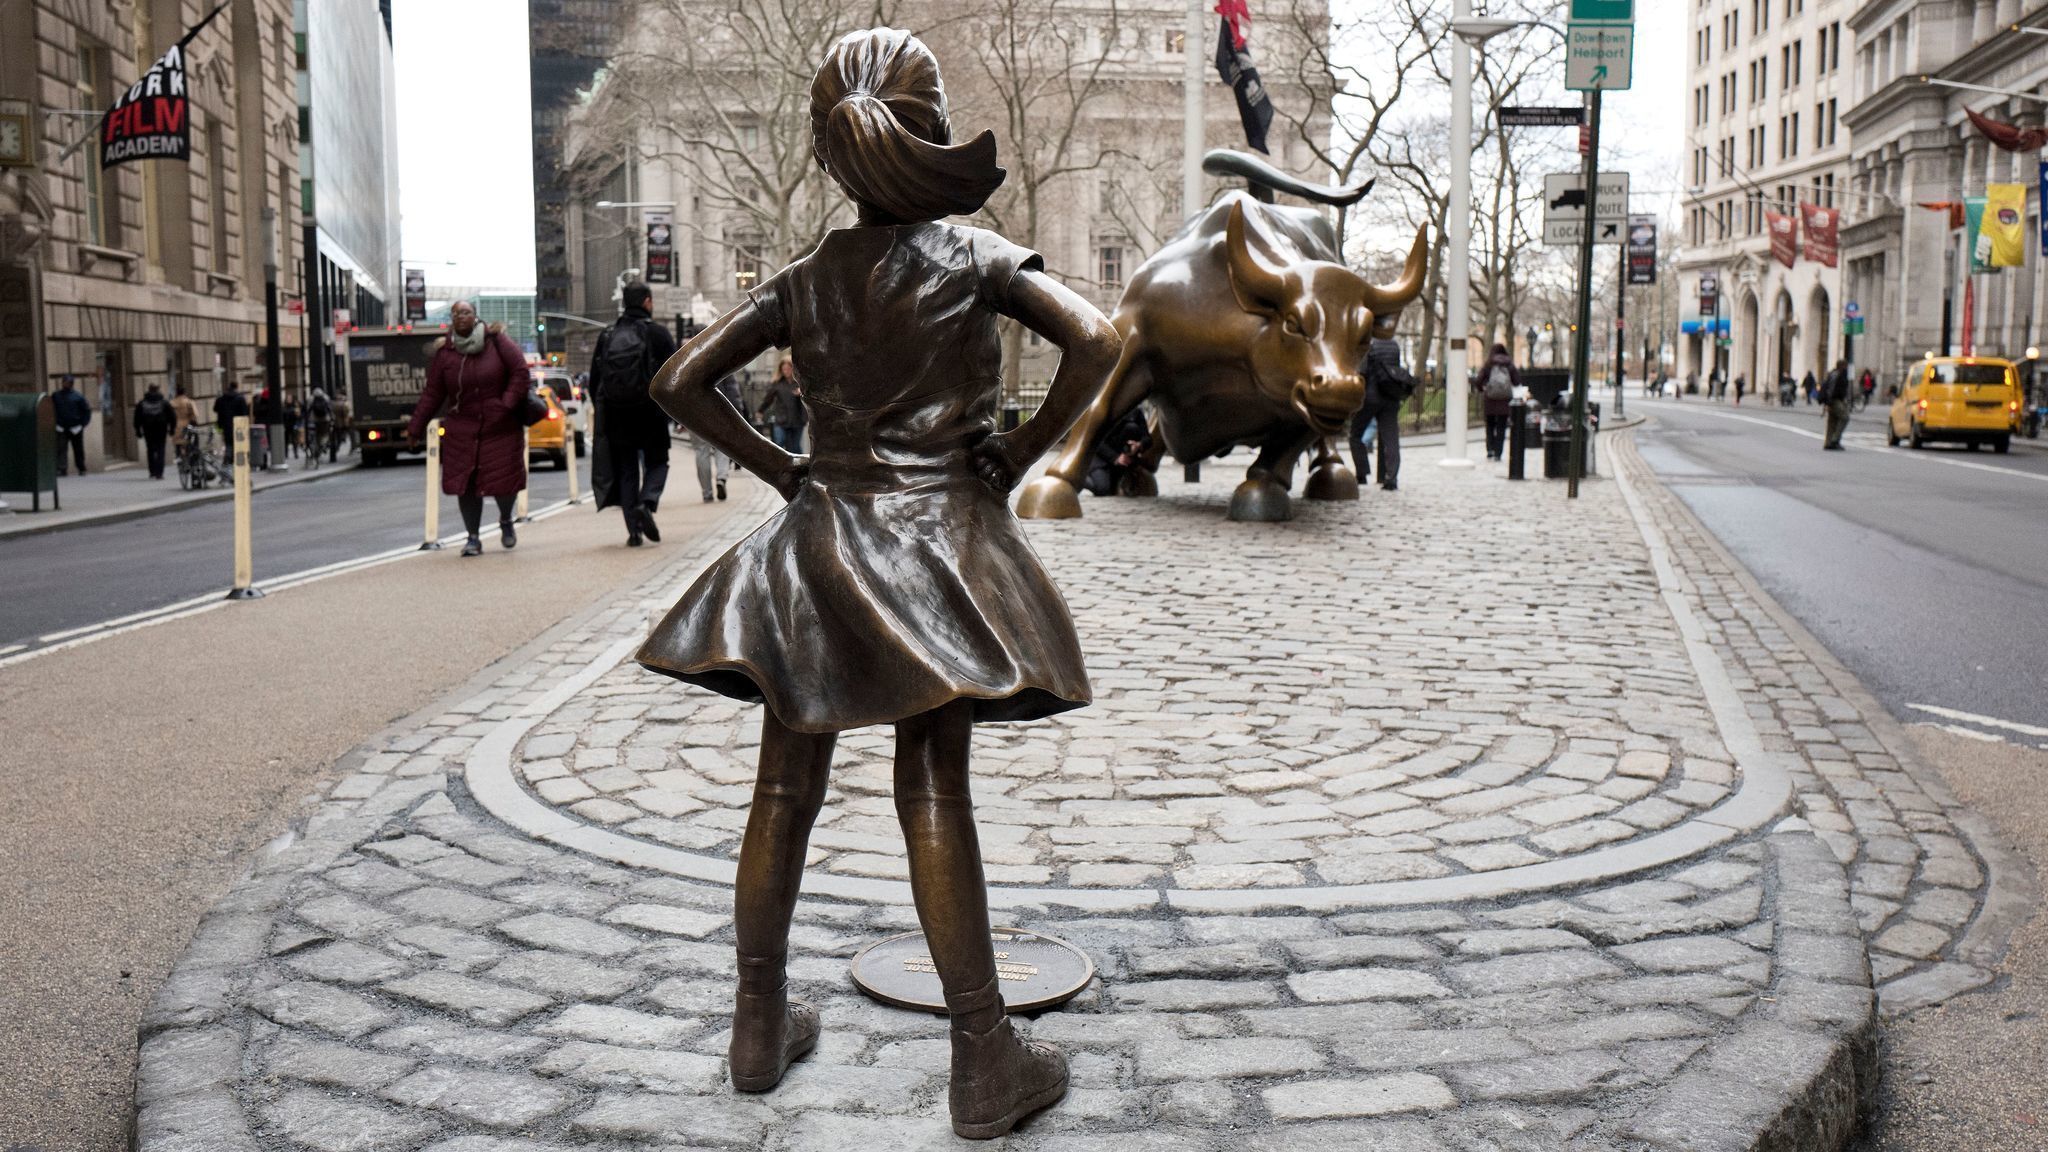 2048x1152 Why there's a statue of a fearless girl facing Wall Street's 'Charging Bull' | Fearless girl statue, Charging bull, Statue